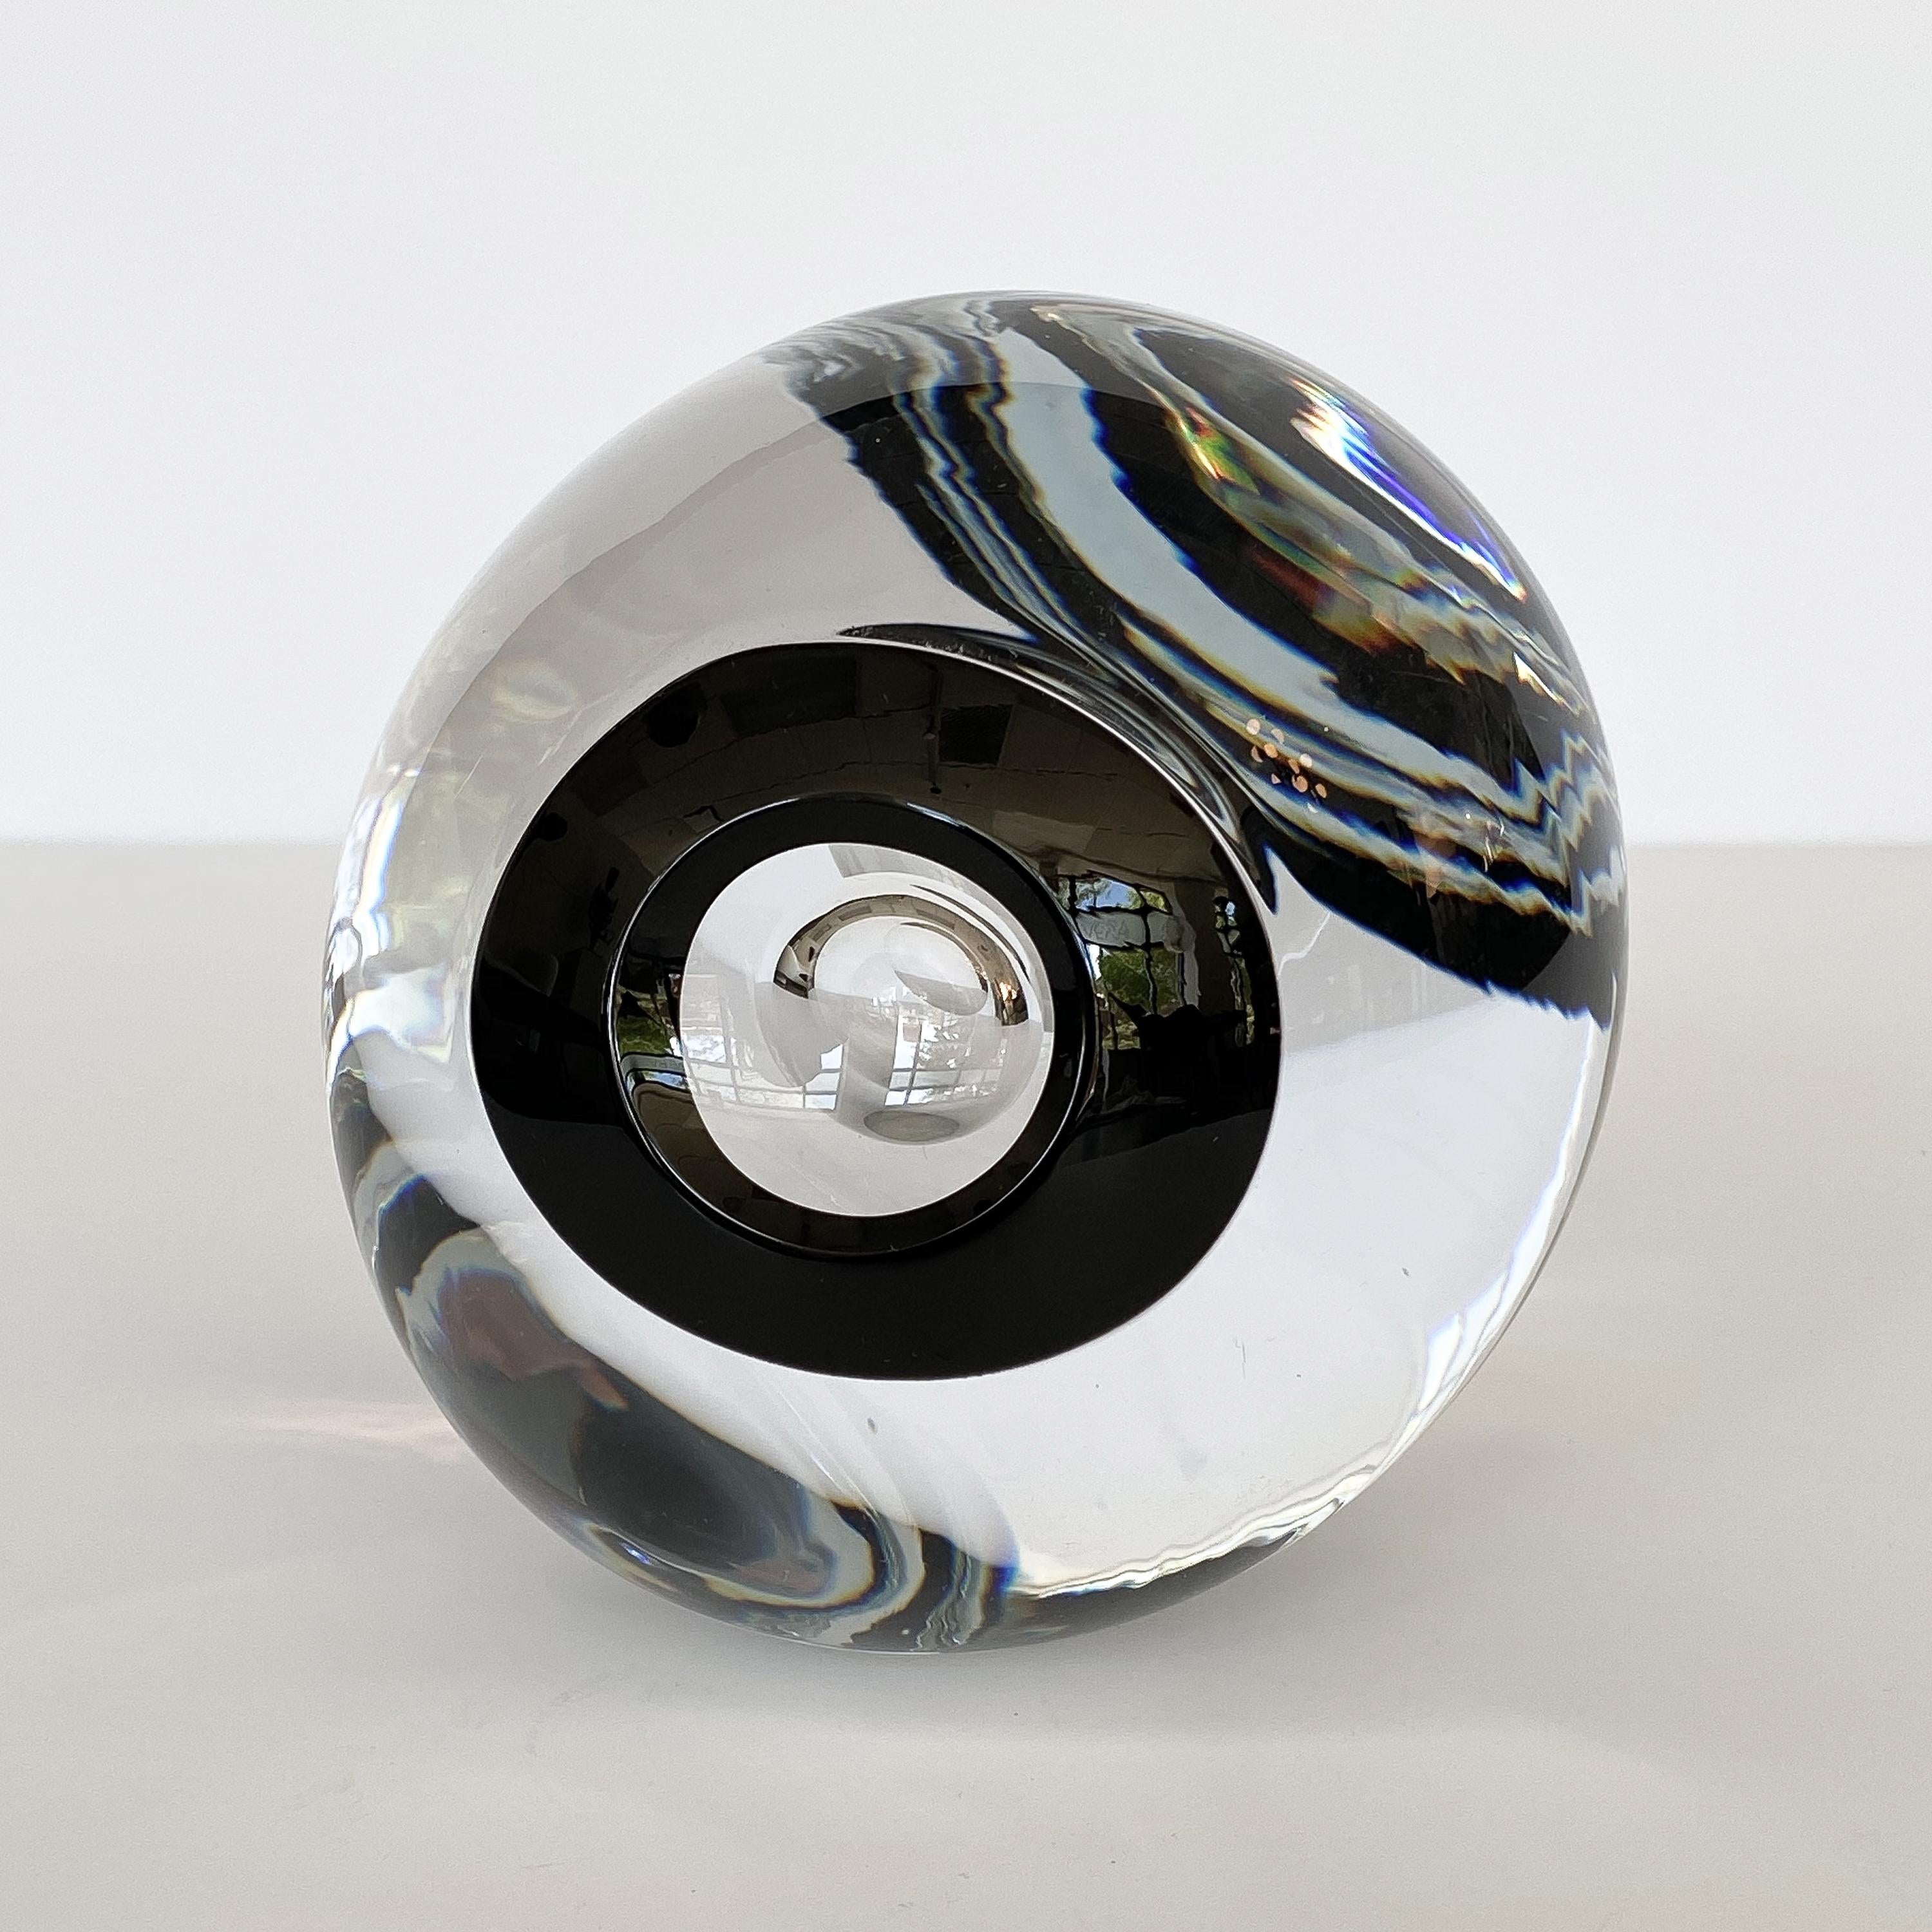 Abstract art glass sculpture by Lennart Nissmark and Martin Zirnsack for Studio Ahus, circa 2000. This is the largest sculpture from the Zero collection. The Zero collection was to celebrate the new millennium and also due to the circular elements